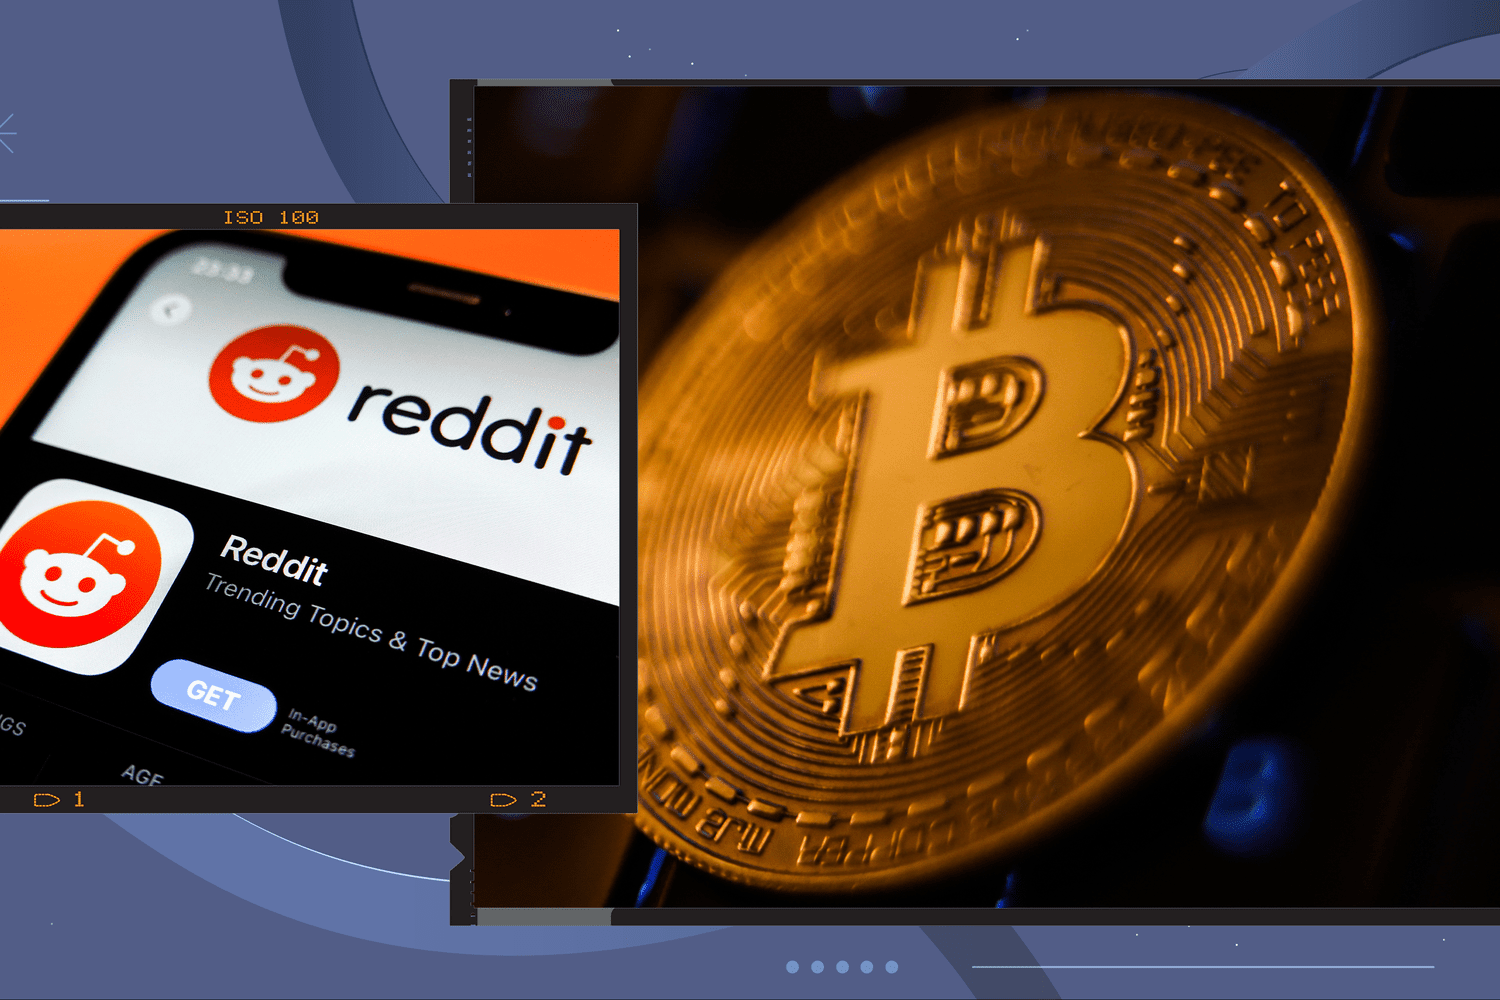 Reddit invests in Bitcoin and Ethereum ahead of IPO